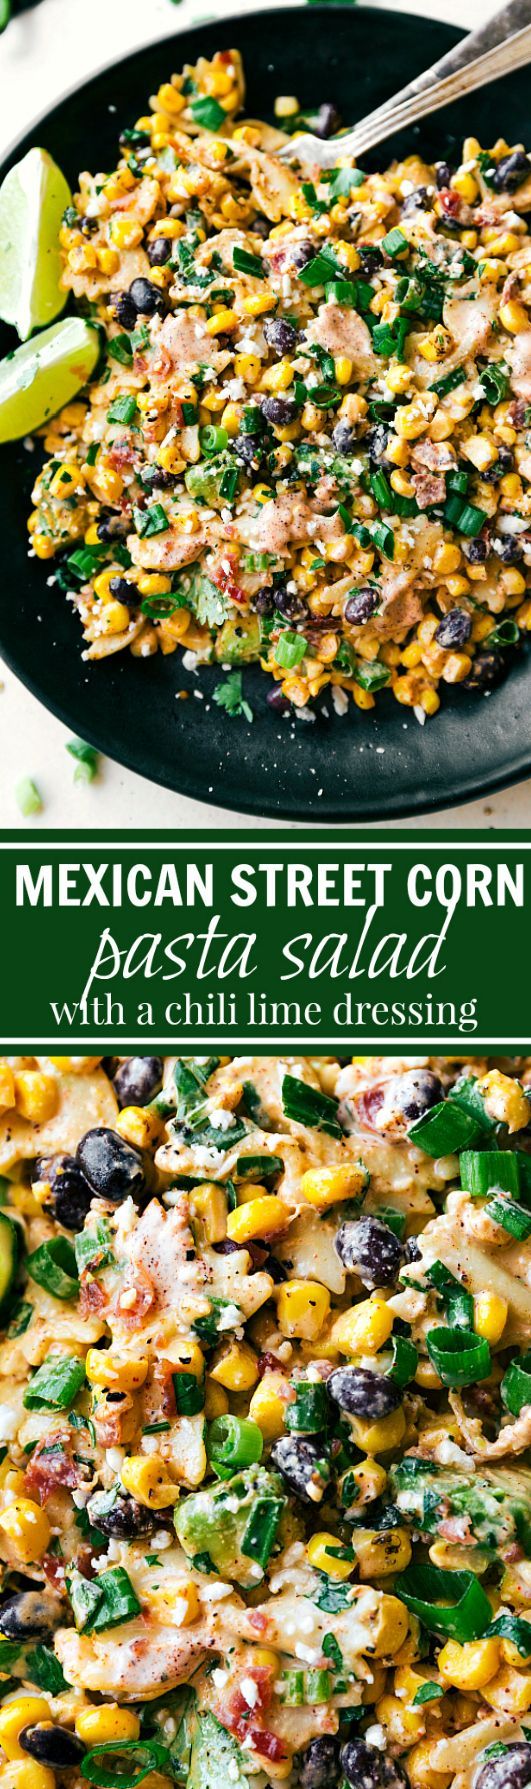 A delicious MEXICAN STREET CORN Pasta salad with tons of veggies, bacon, and a sim